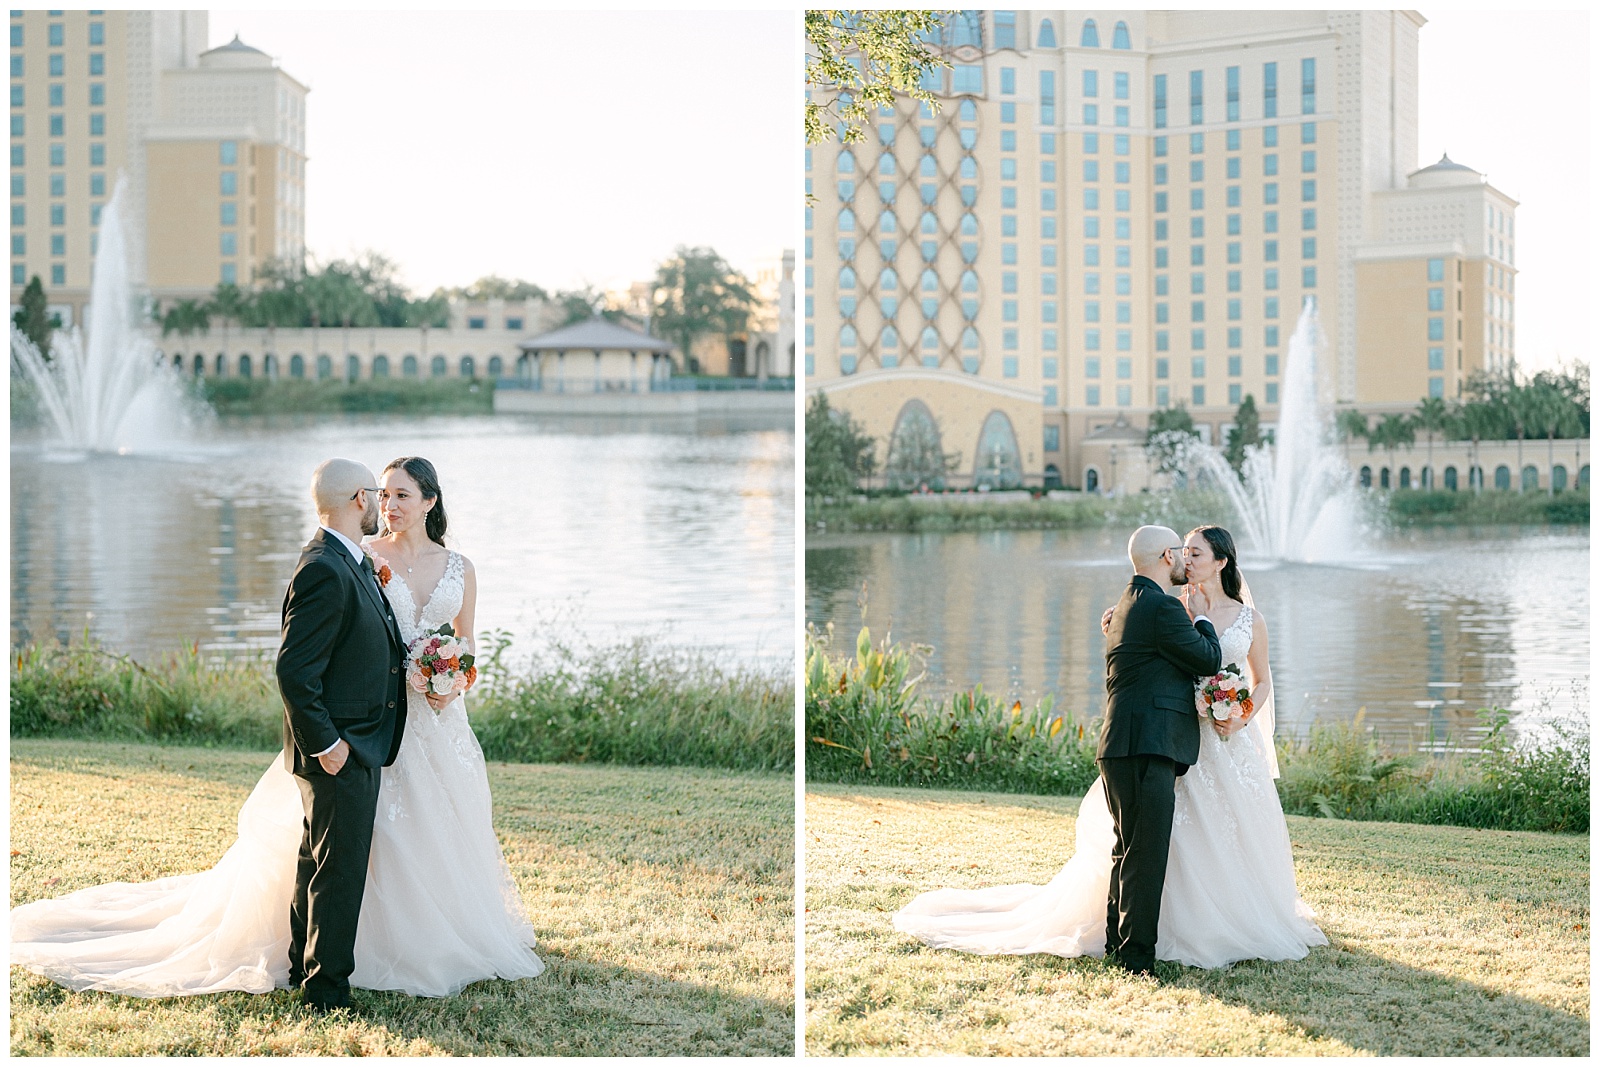 Left: Bride and Groom portrait next to Disney's Riviera Resort Lake.
Right: Bride and Groom kiss portrait next to Disney's Riviera Resort Lake.
By Elizabeth Kane Photography in Orlando Florida